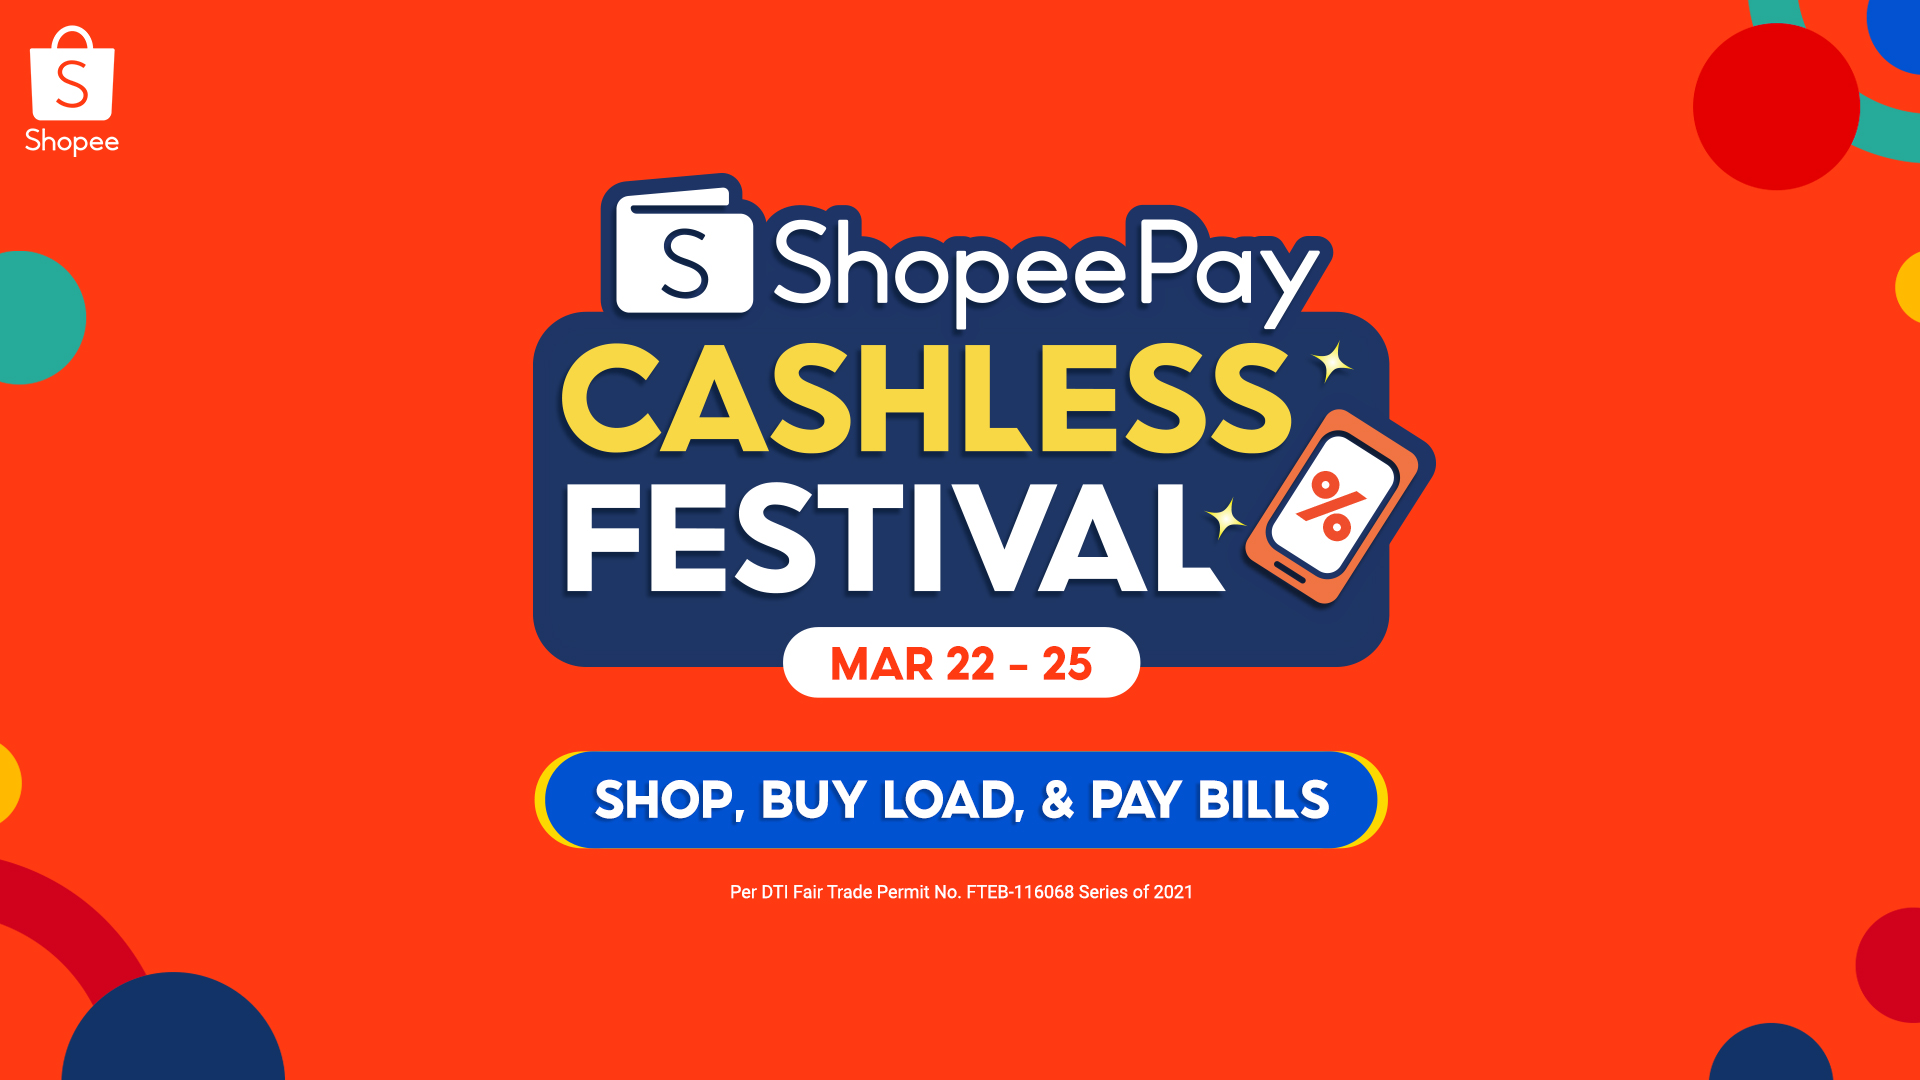 Enjoy Free Shipping, PHP1 Deals, Bigger Cashbacks, and More at the 4.4 ShopeePay Cashless Festival